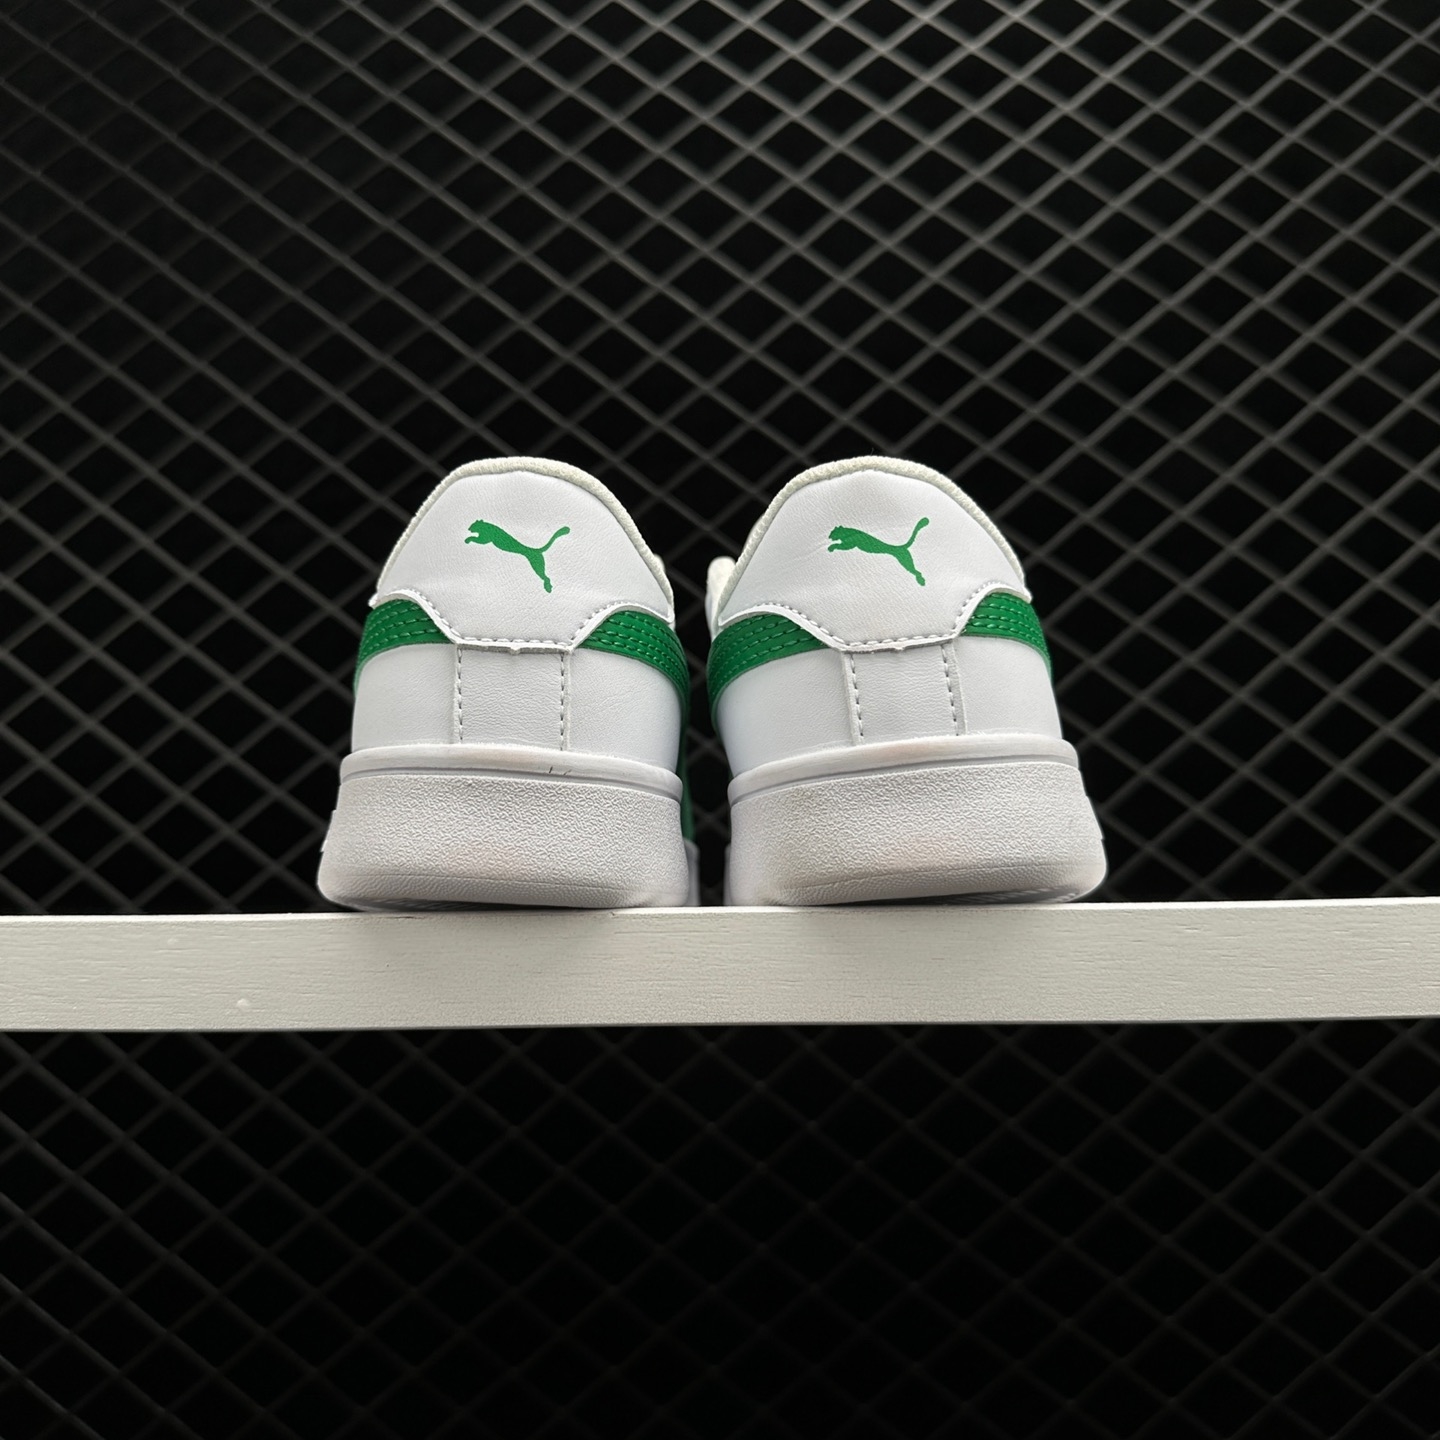 Puma Smash V2 White Green - Stylish Sneakers for a Fresh Look!